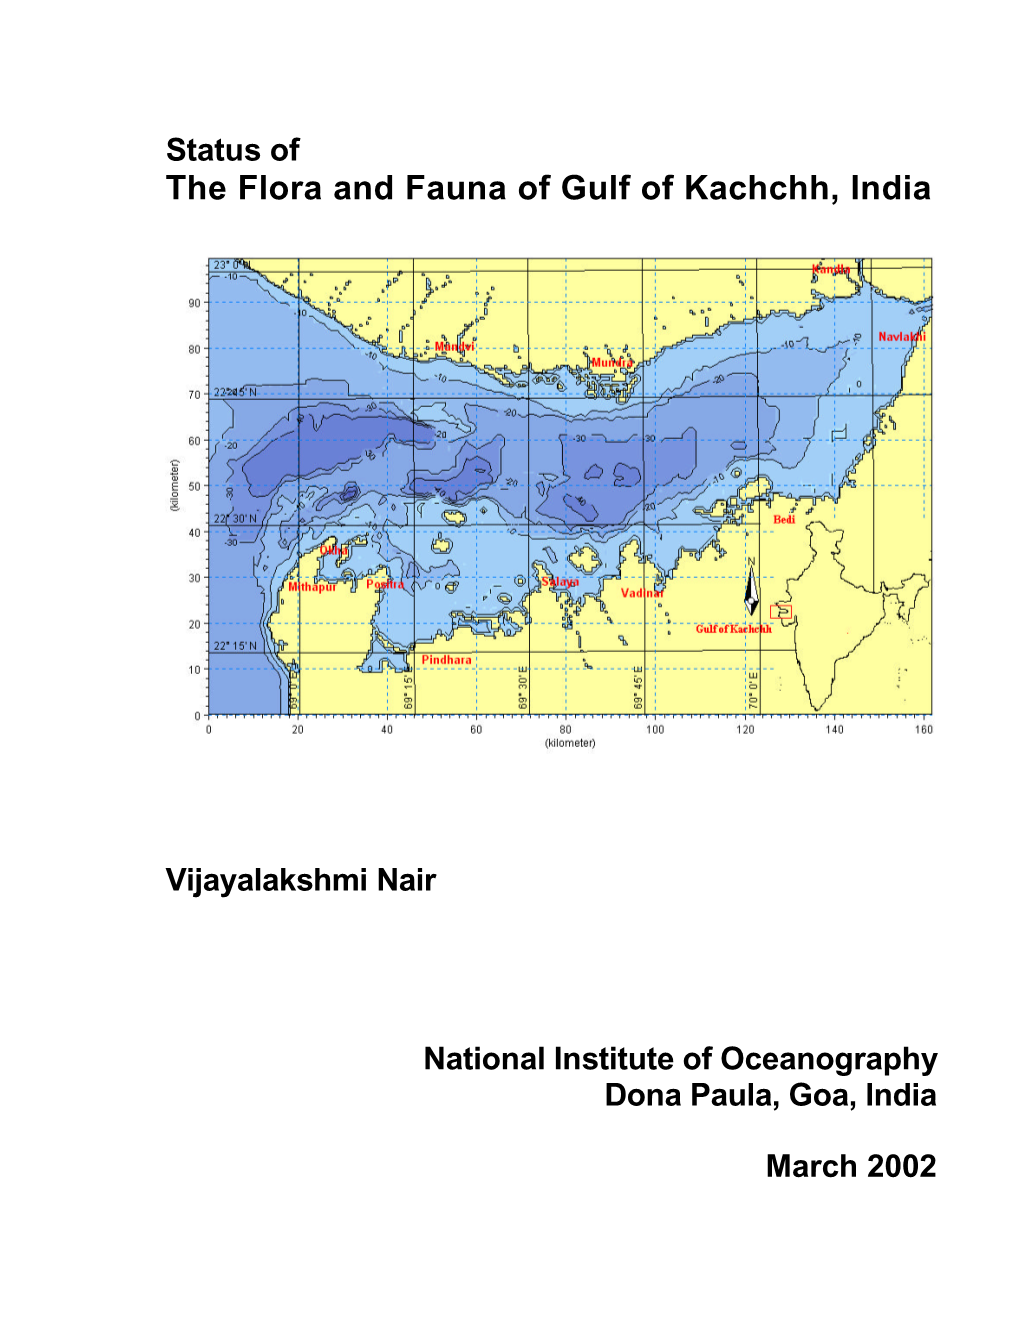 The Flora and Fauna of Gulf of Kachchh, India